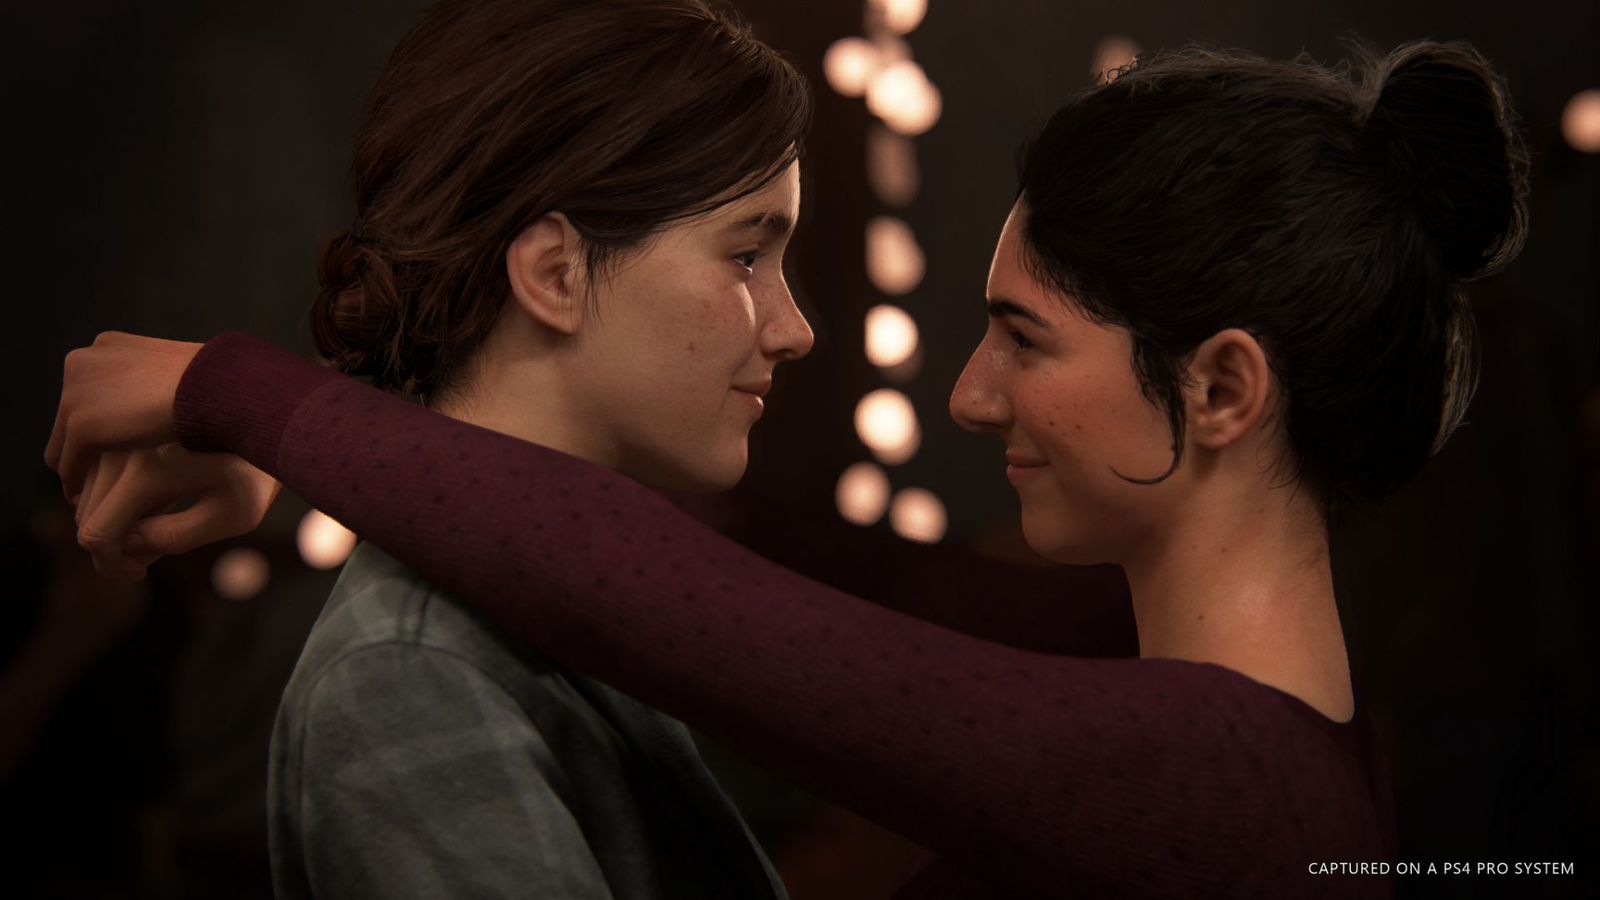 The Last of Us Episode 3 is Being Review Bombed